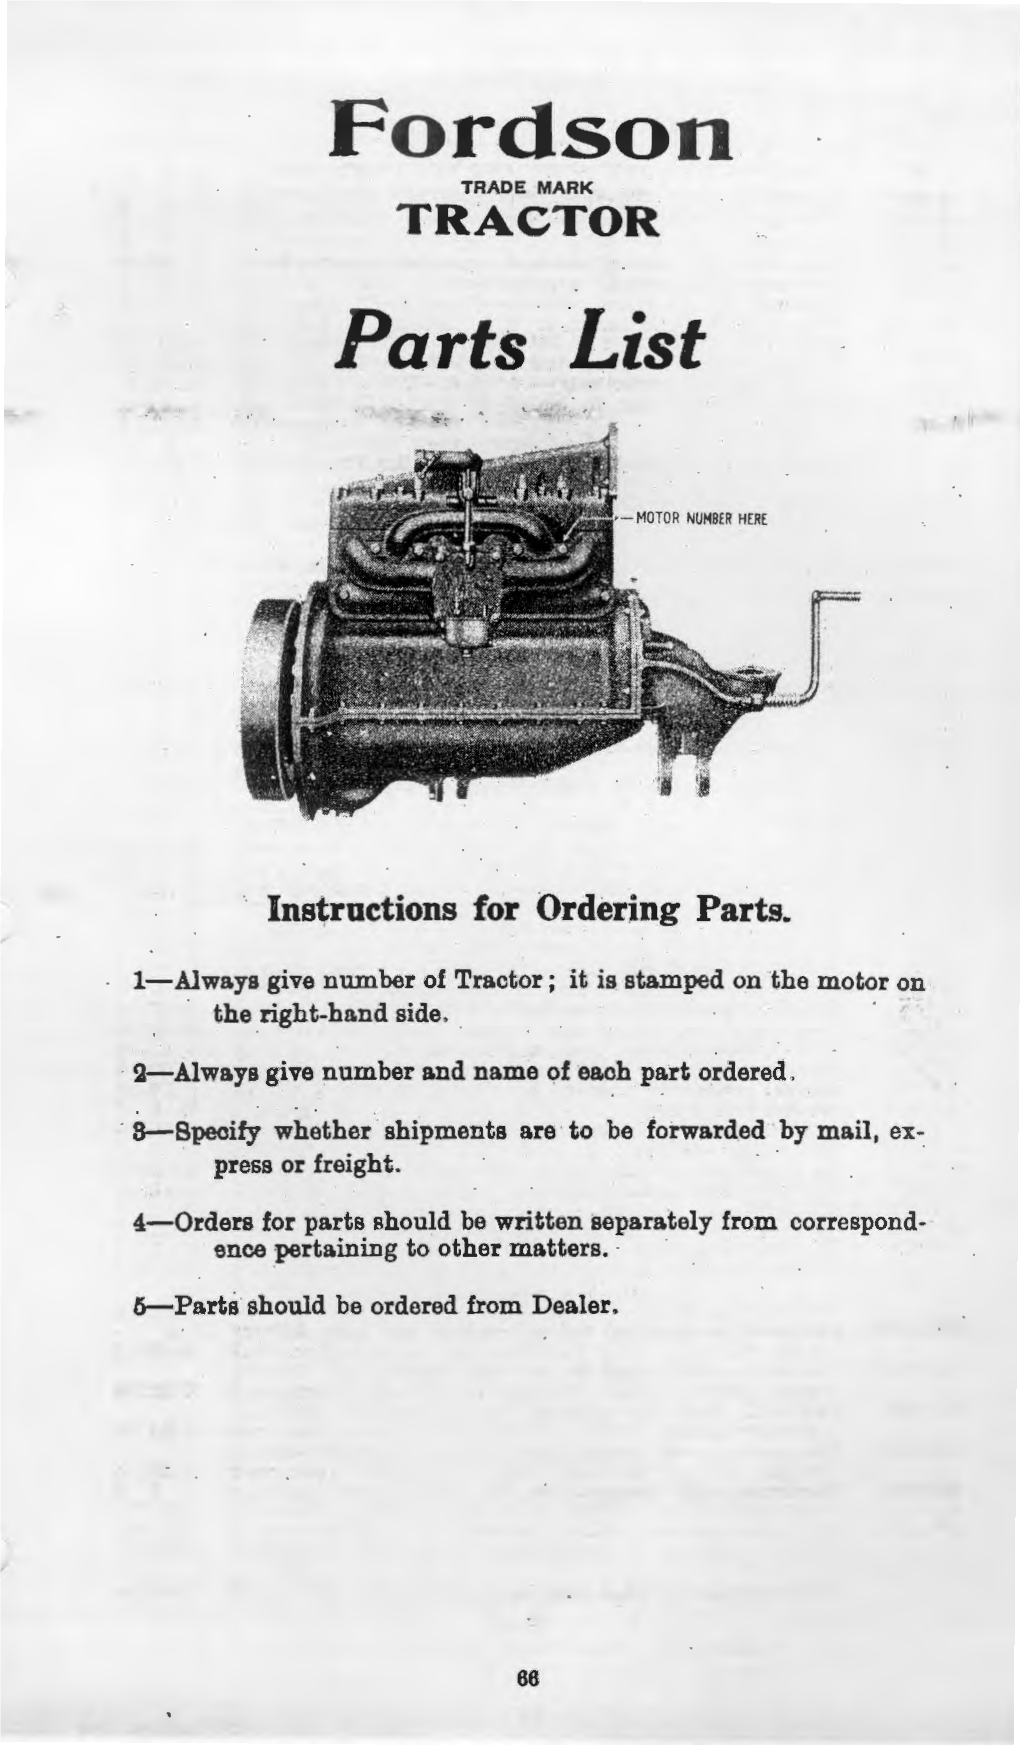 Fordson Tractor Parts List